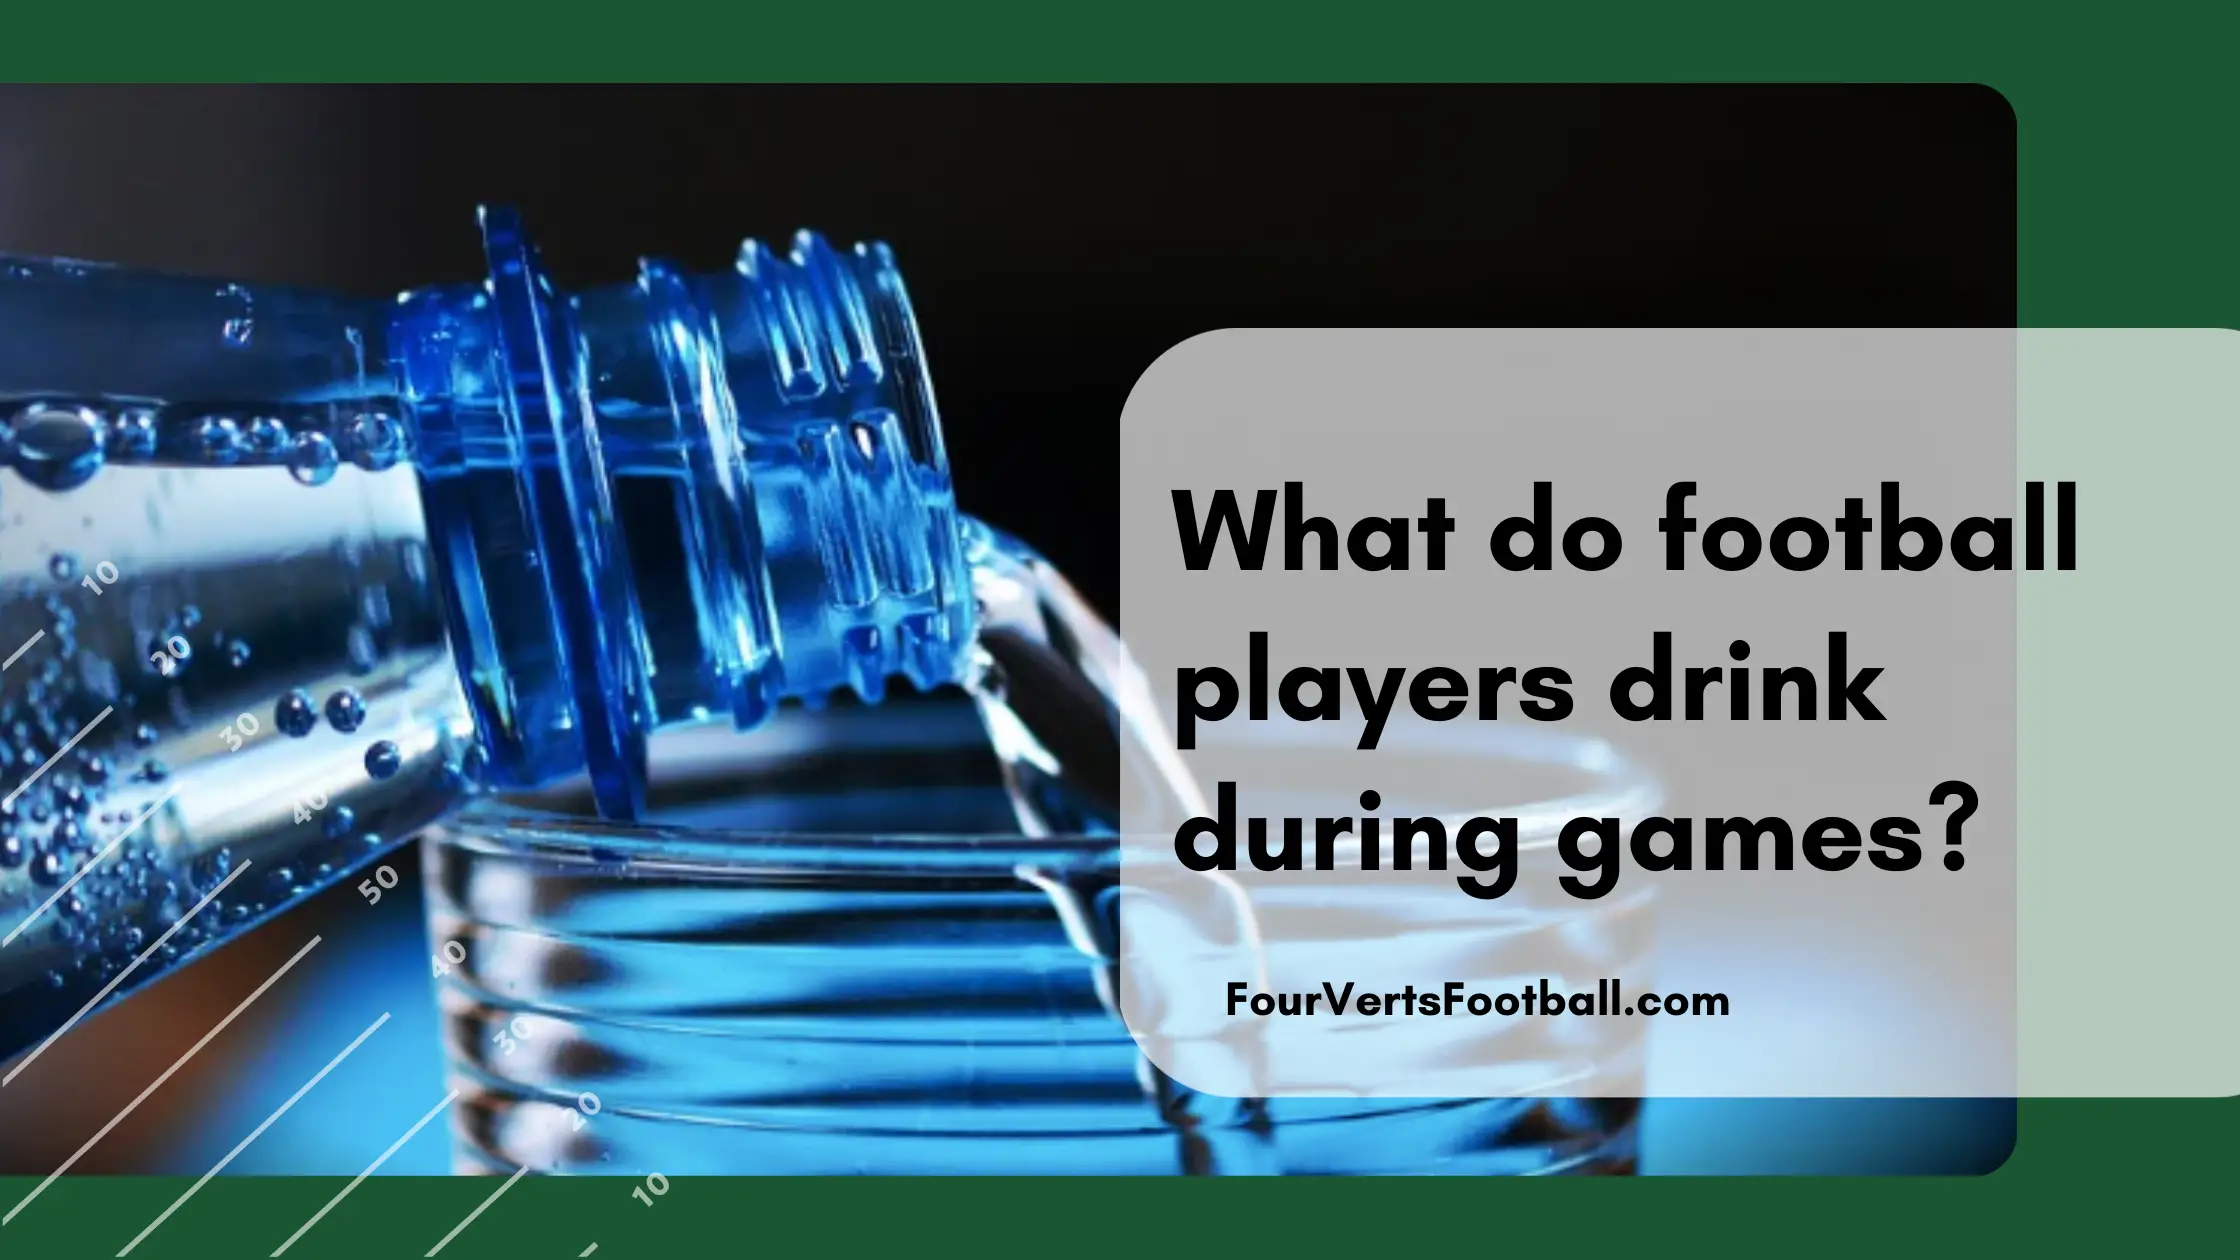 What do football players drink during games?